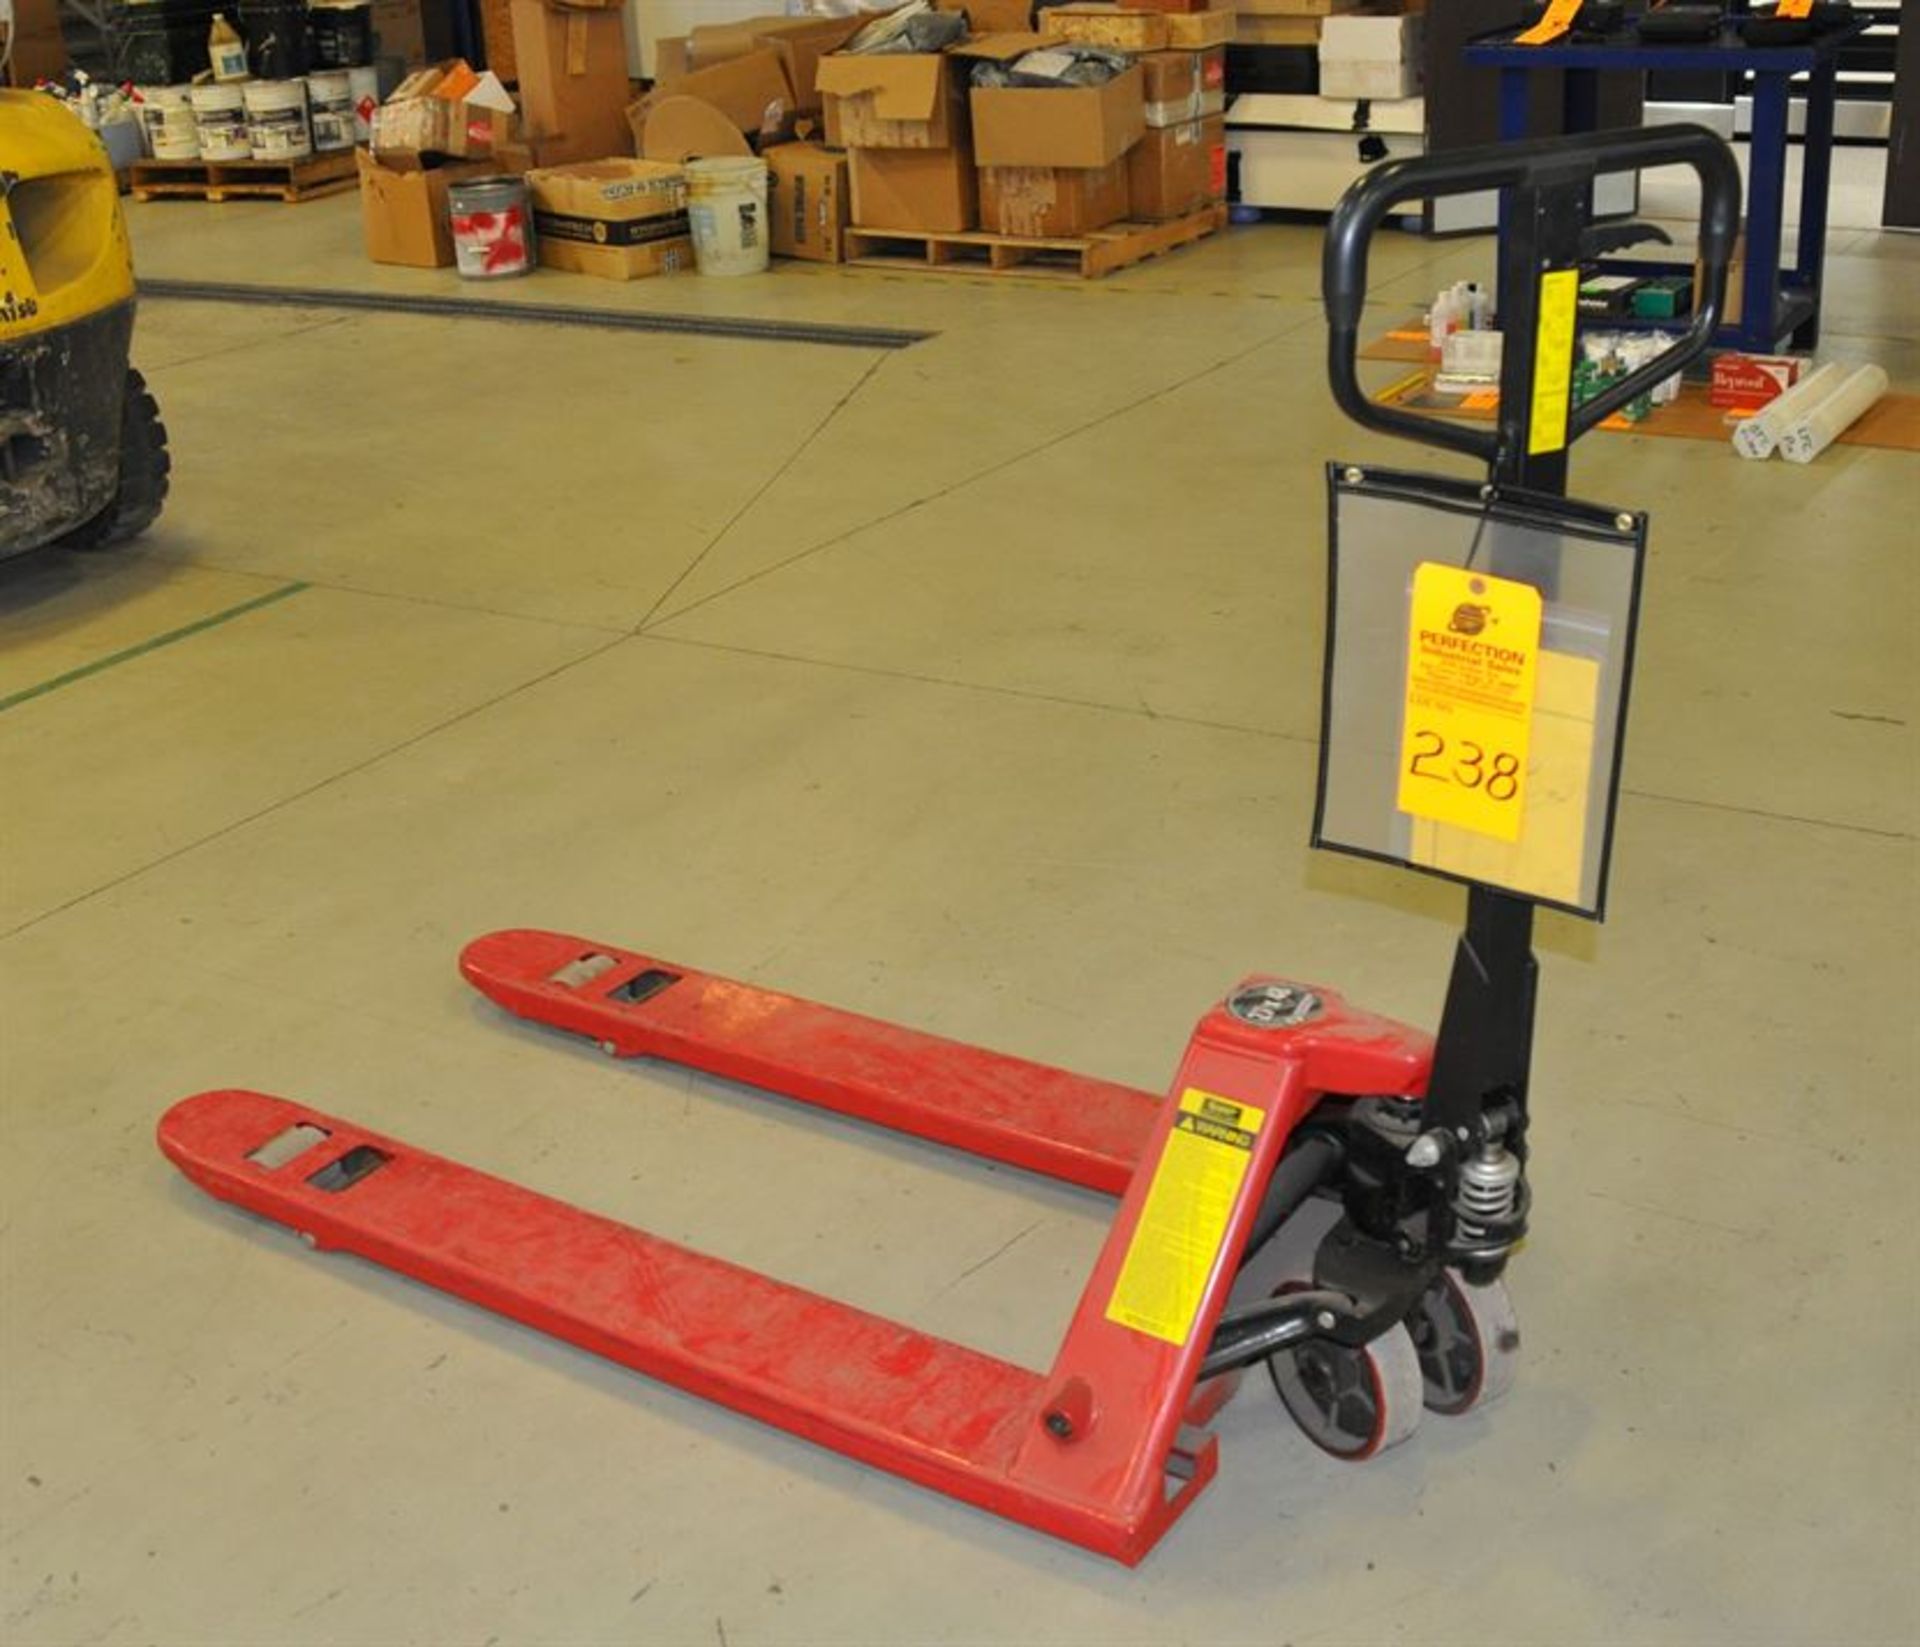 Shippers Supply Pallet Jack, 5500 lb, 27x48"